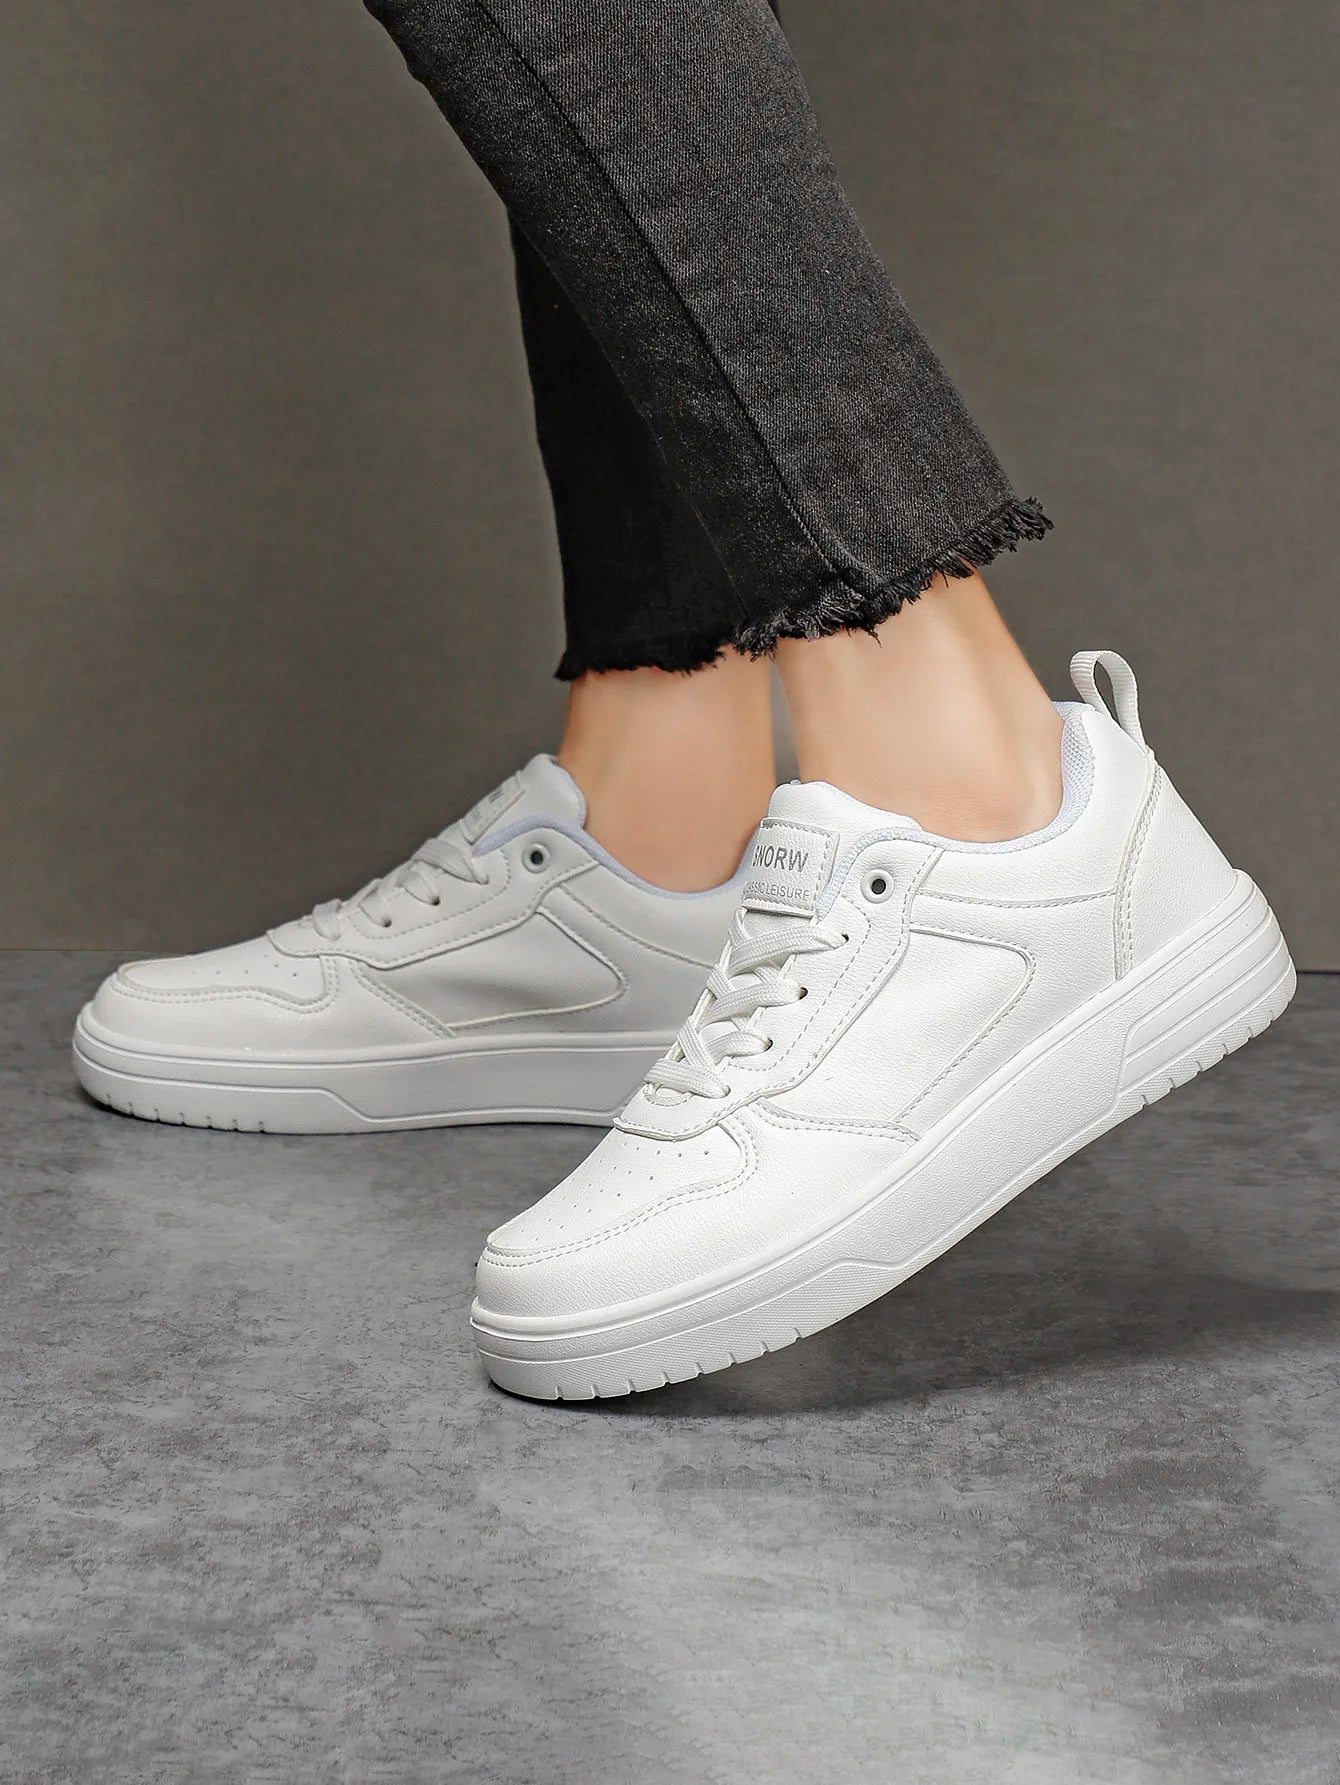 Men Casual Shoes Comfortable Sneakers Lightweight Walking Shoes